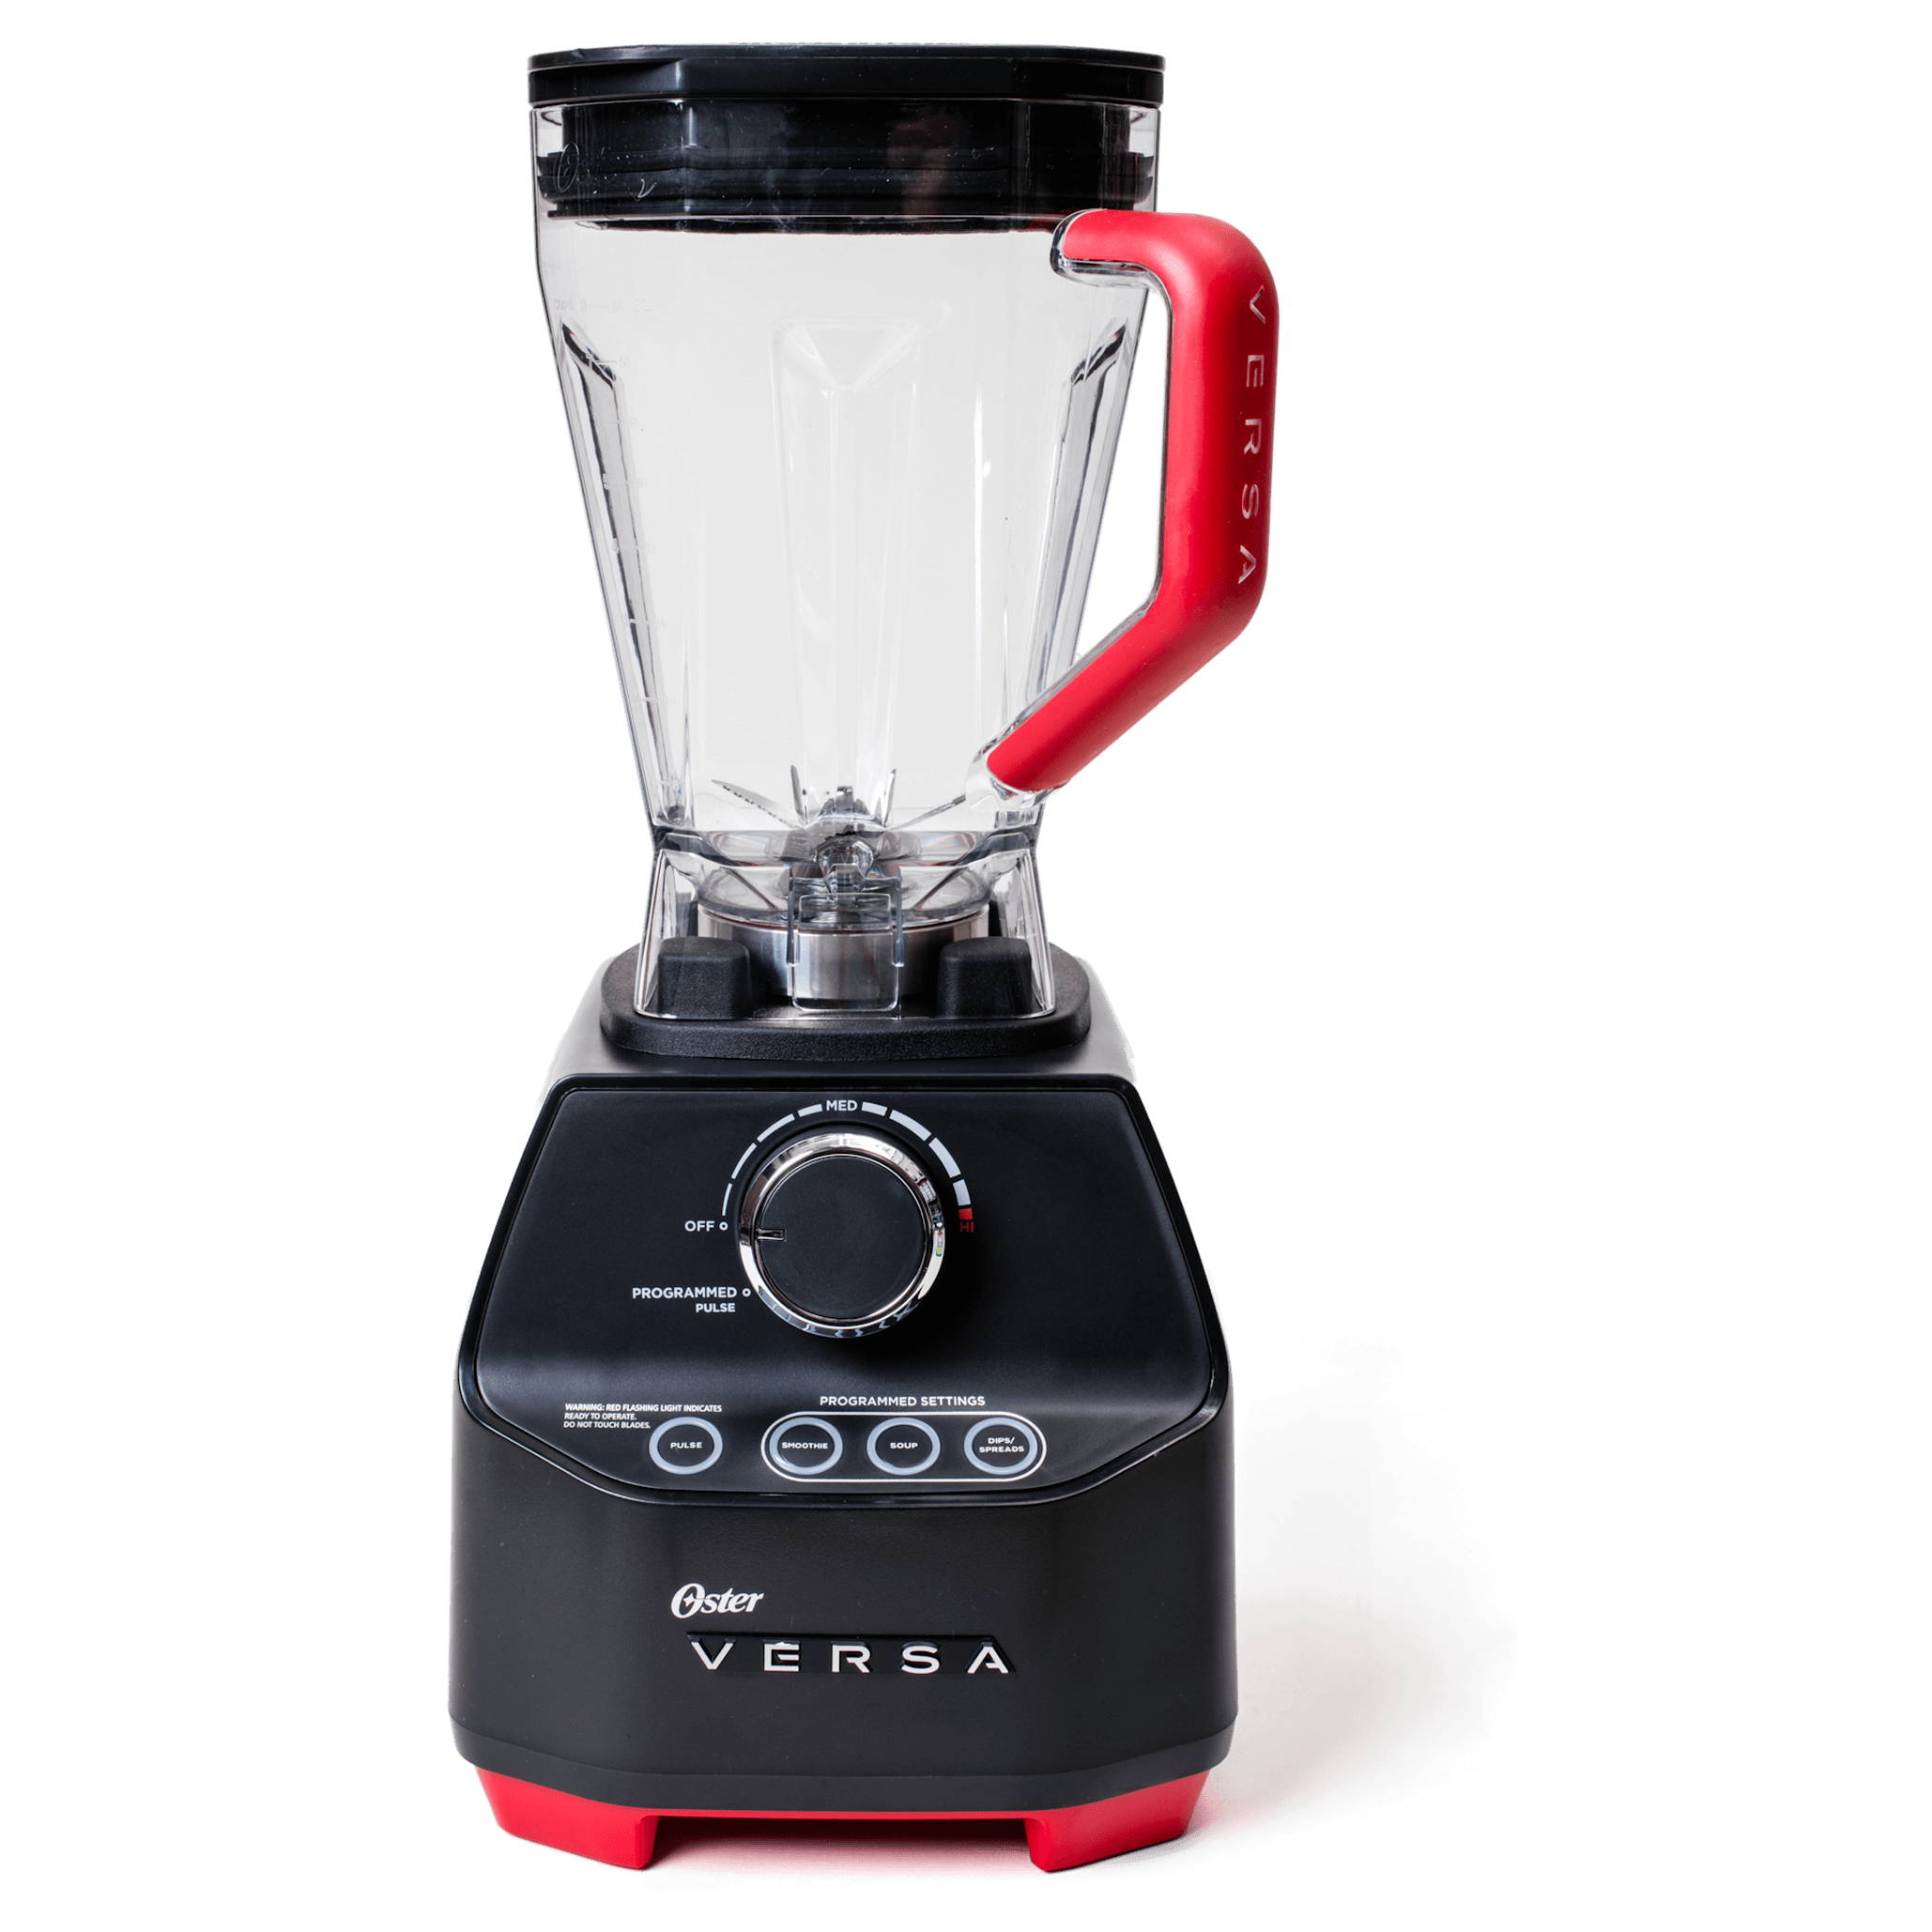 Watch Design Engineer Tests $600 & $25 Blenders, Tried and Tested